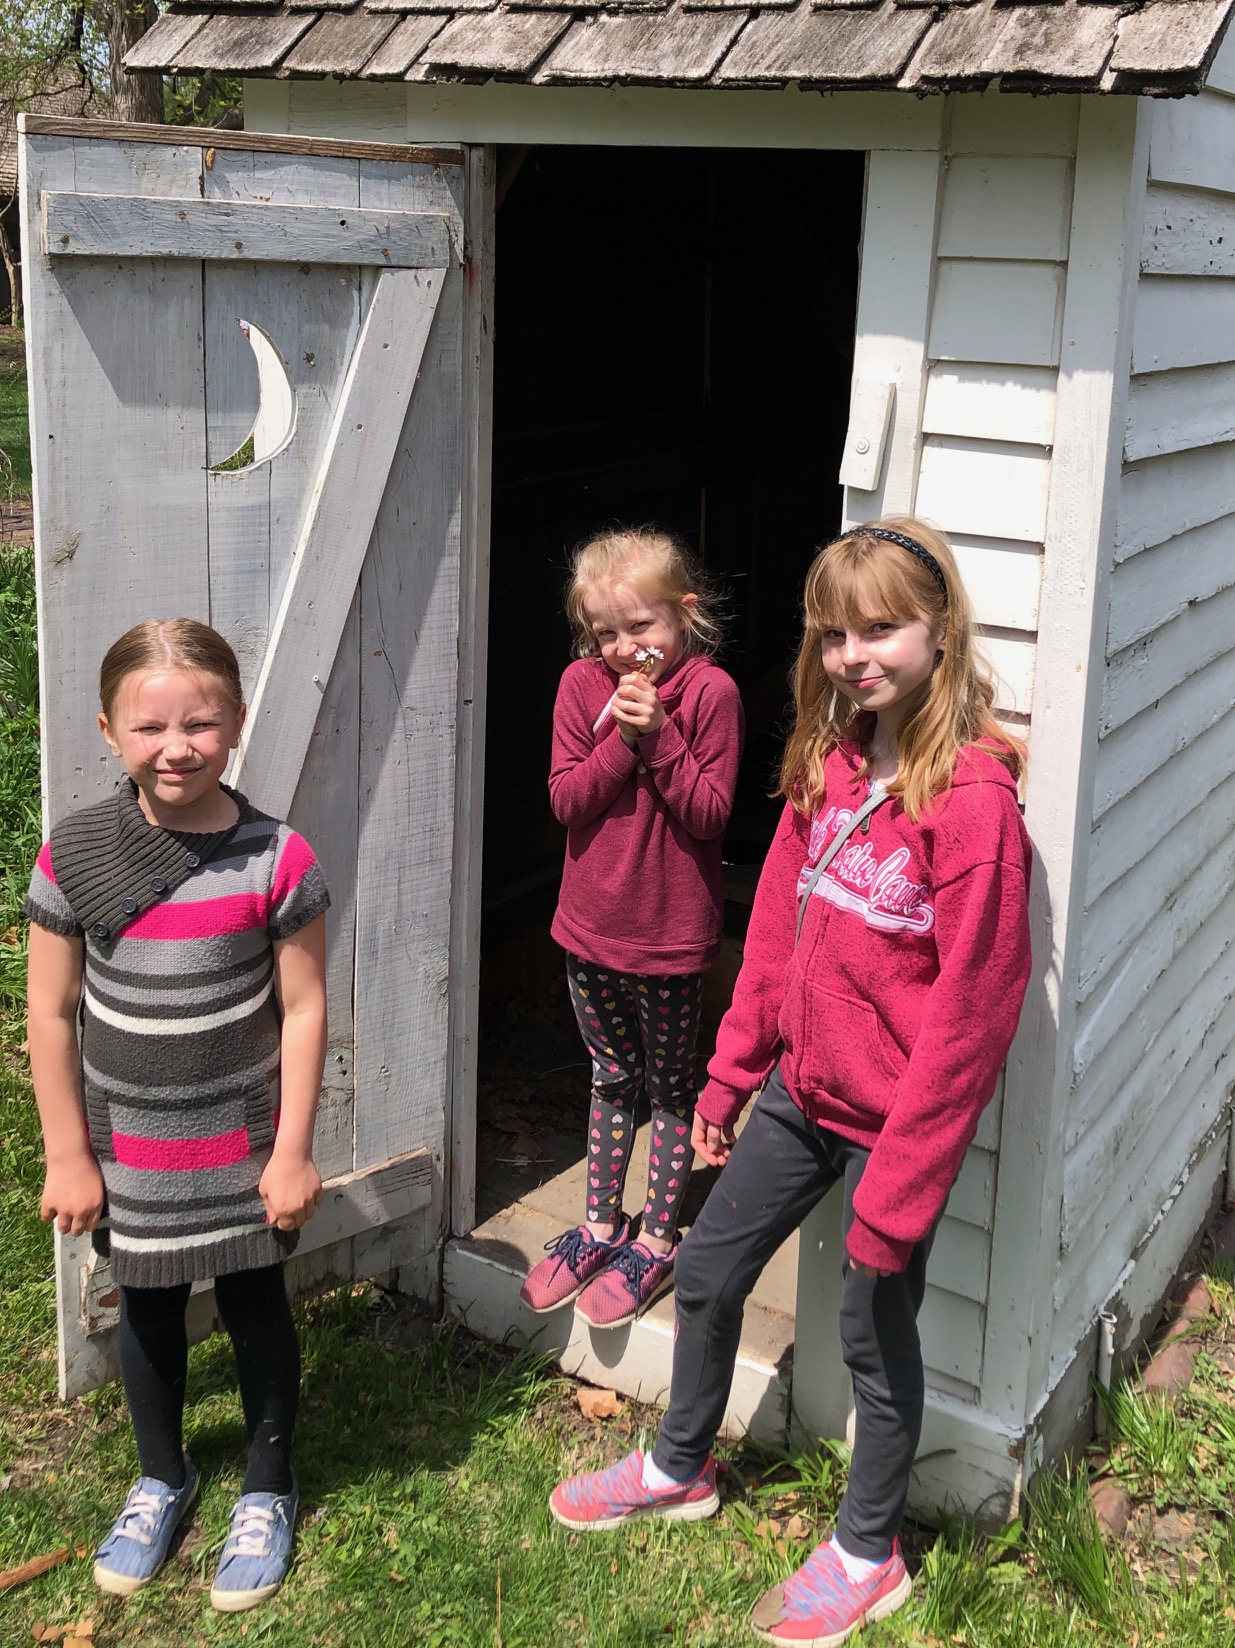 Galesburg area 4th-graders visit the "backhouse"  behind Carl Sandburg's Birthplace Cottage during the April 2019 Penny Parade program.